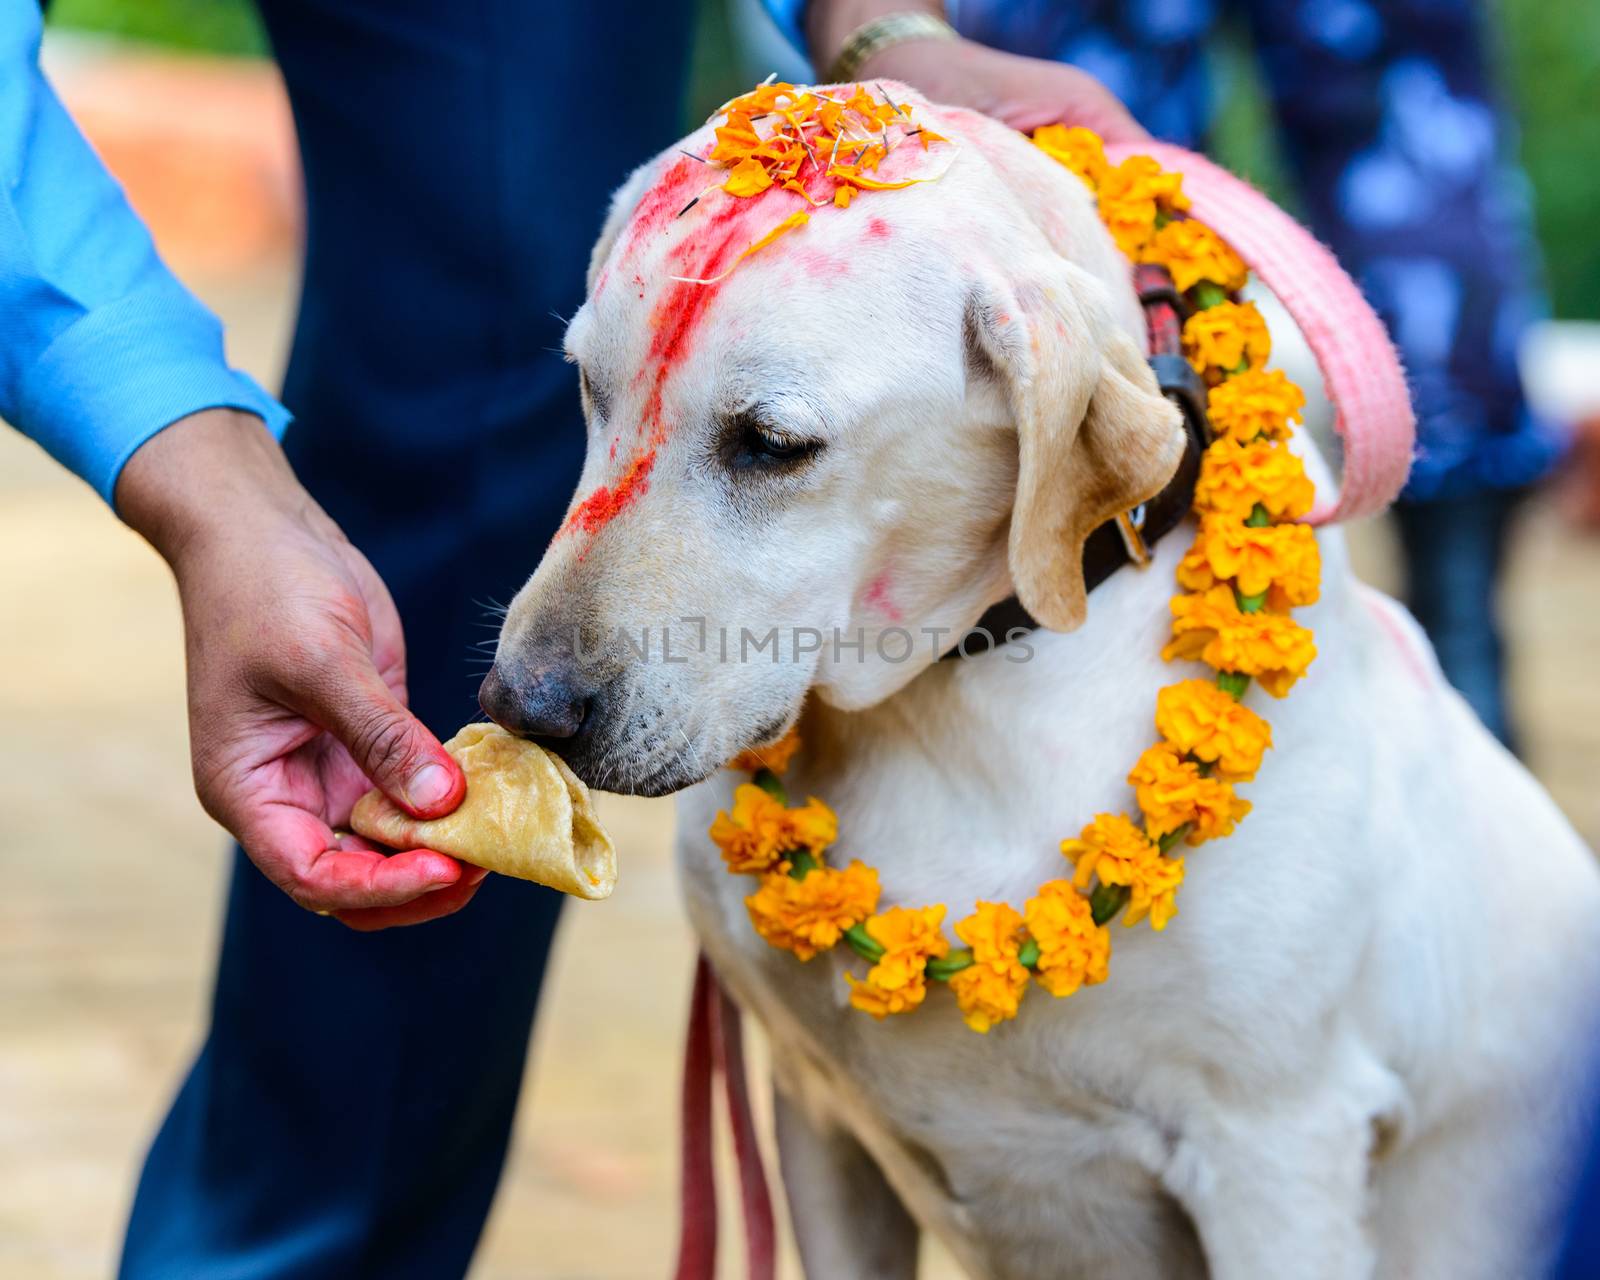 Celebrating Kukur Tihar festival in Kathmandu, Nepal. Labrador with red tika and marigold garland is being given a puri.